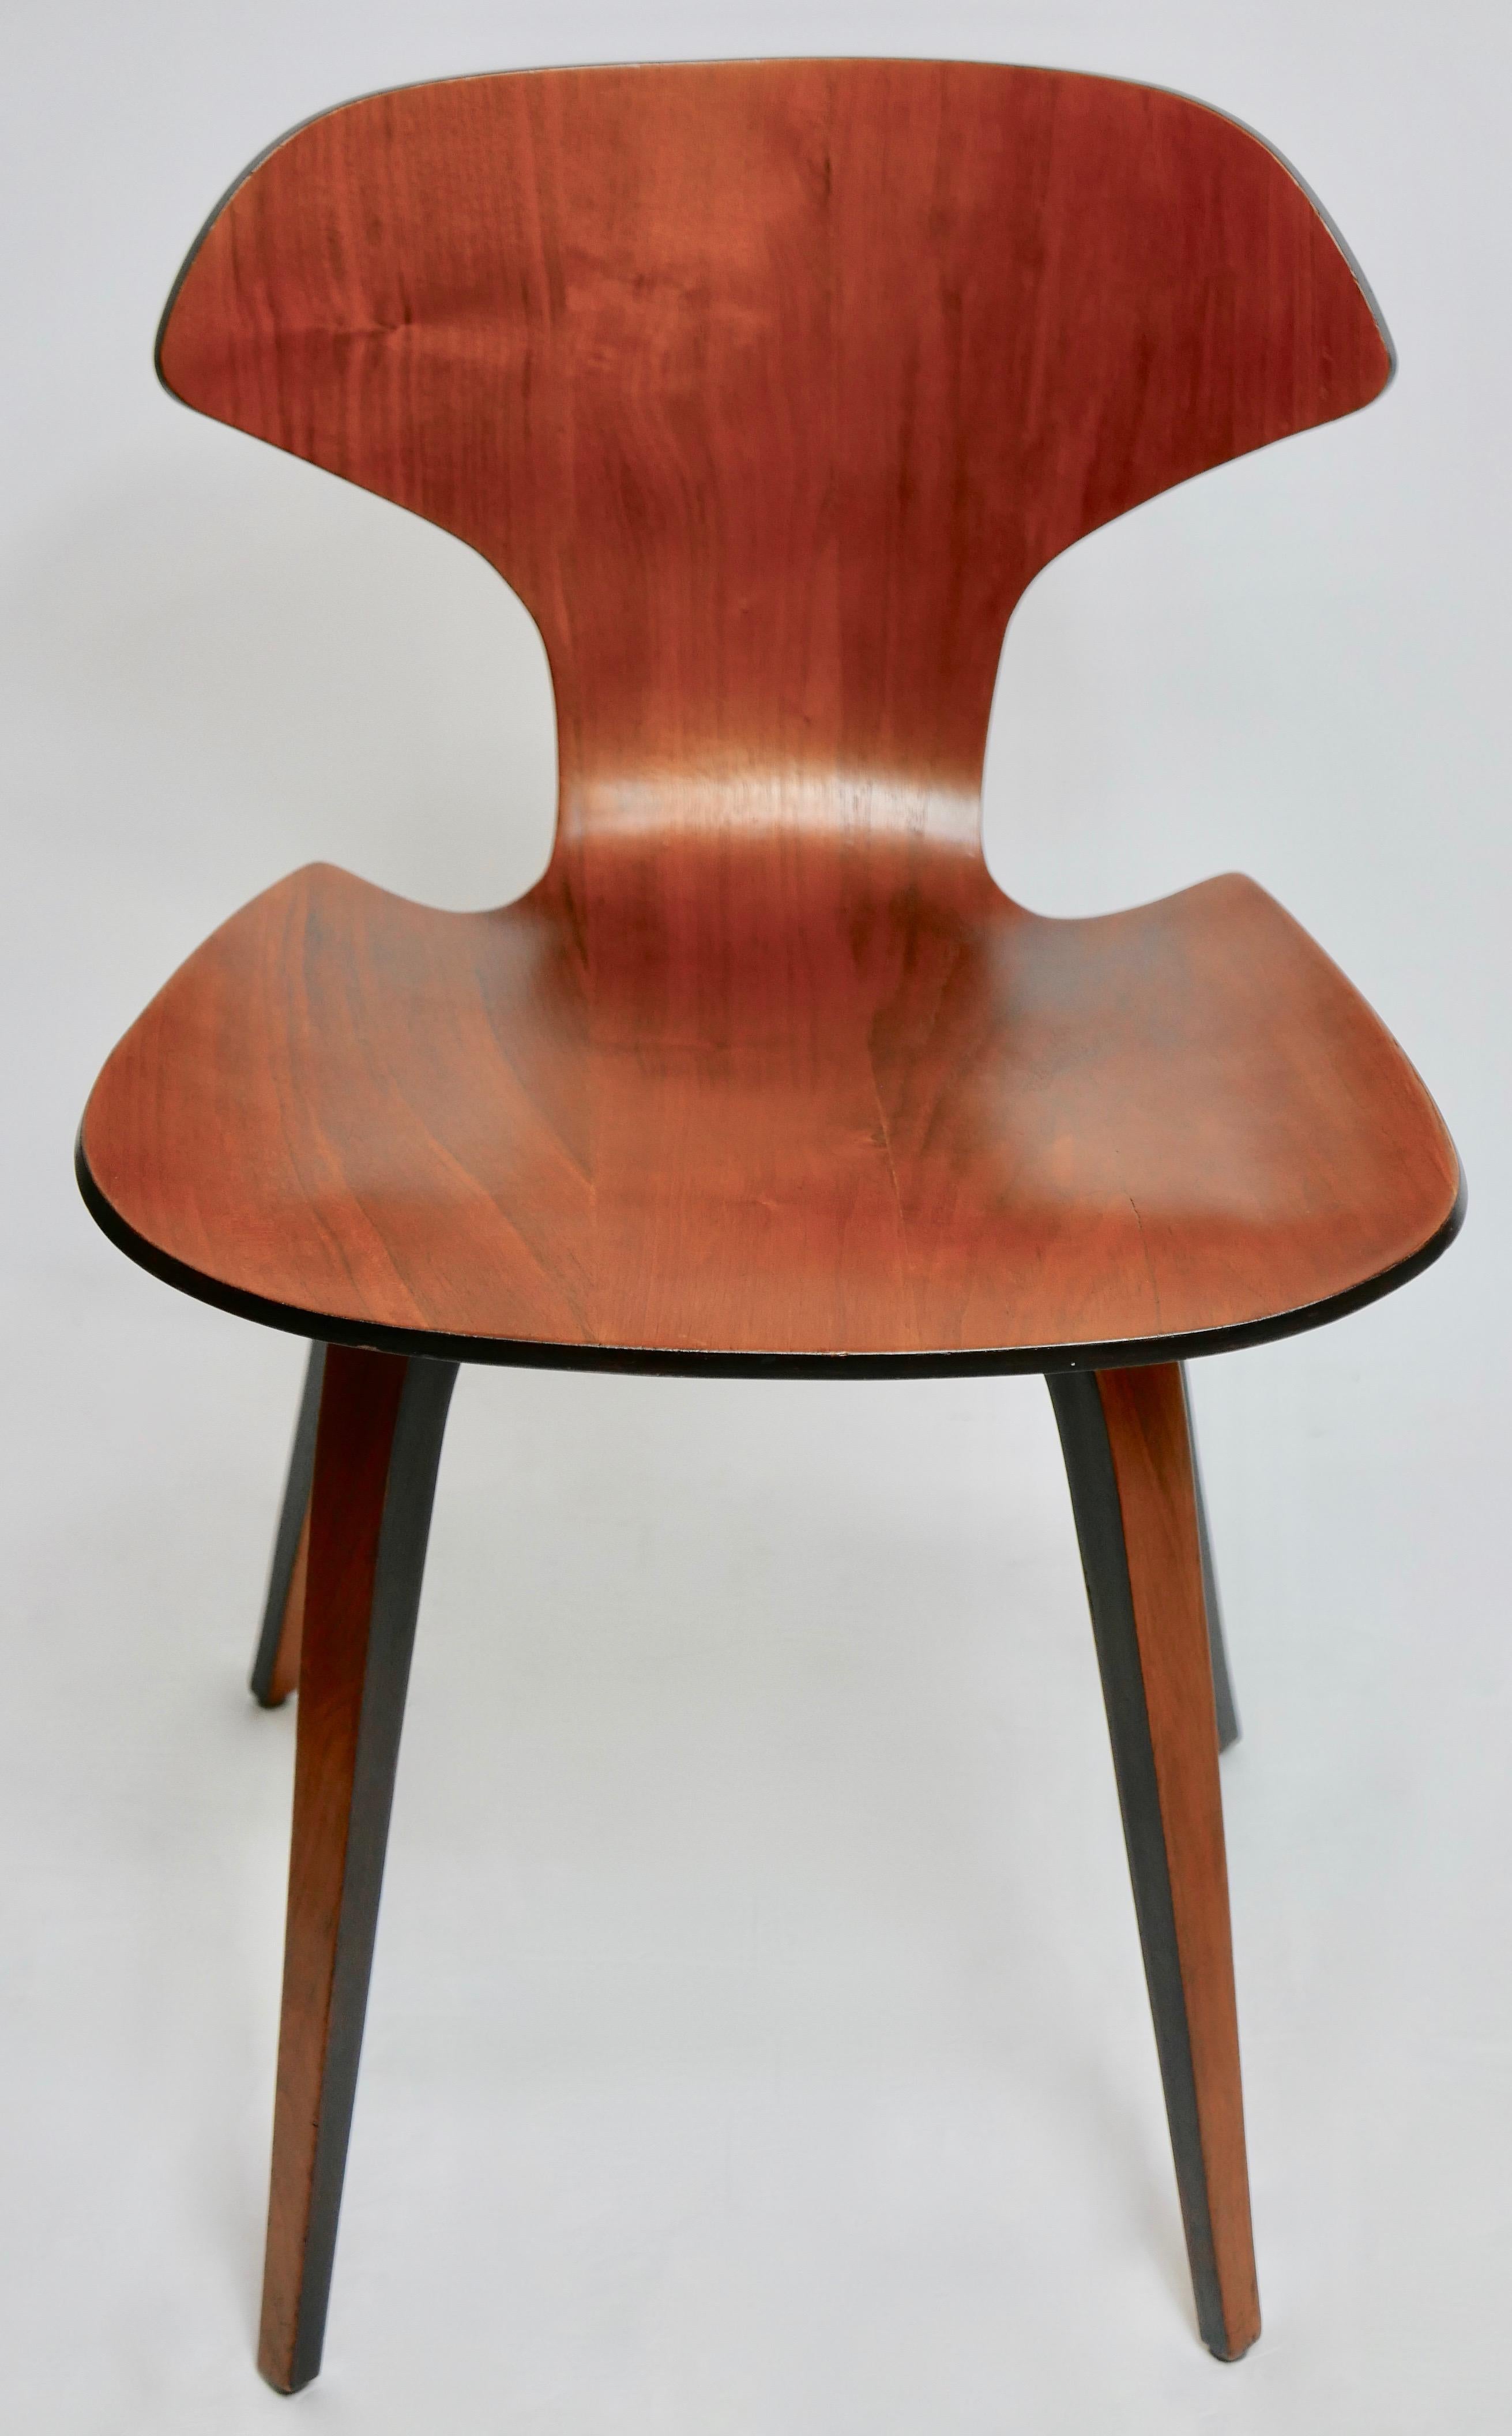 Good looking and unusual pair of Mid-Century Modern walnut plywood side chairs designed by George Mulhauser and manufactured by Plycraft of Lawrence, Mass. 
These chairs have been newly refinished and are in very good vintage condition.
American,